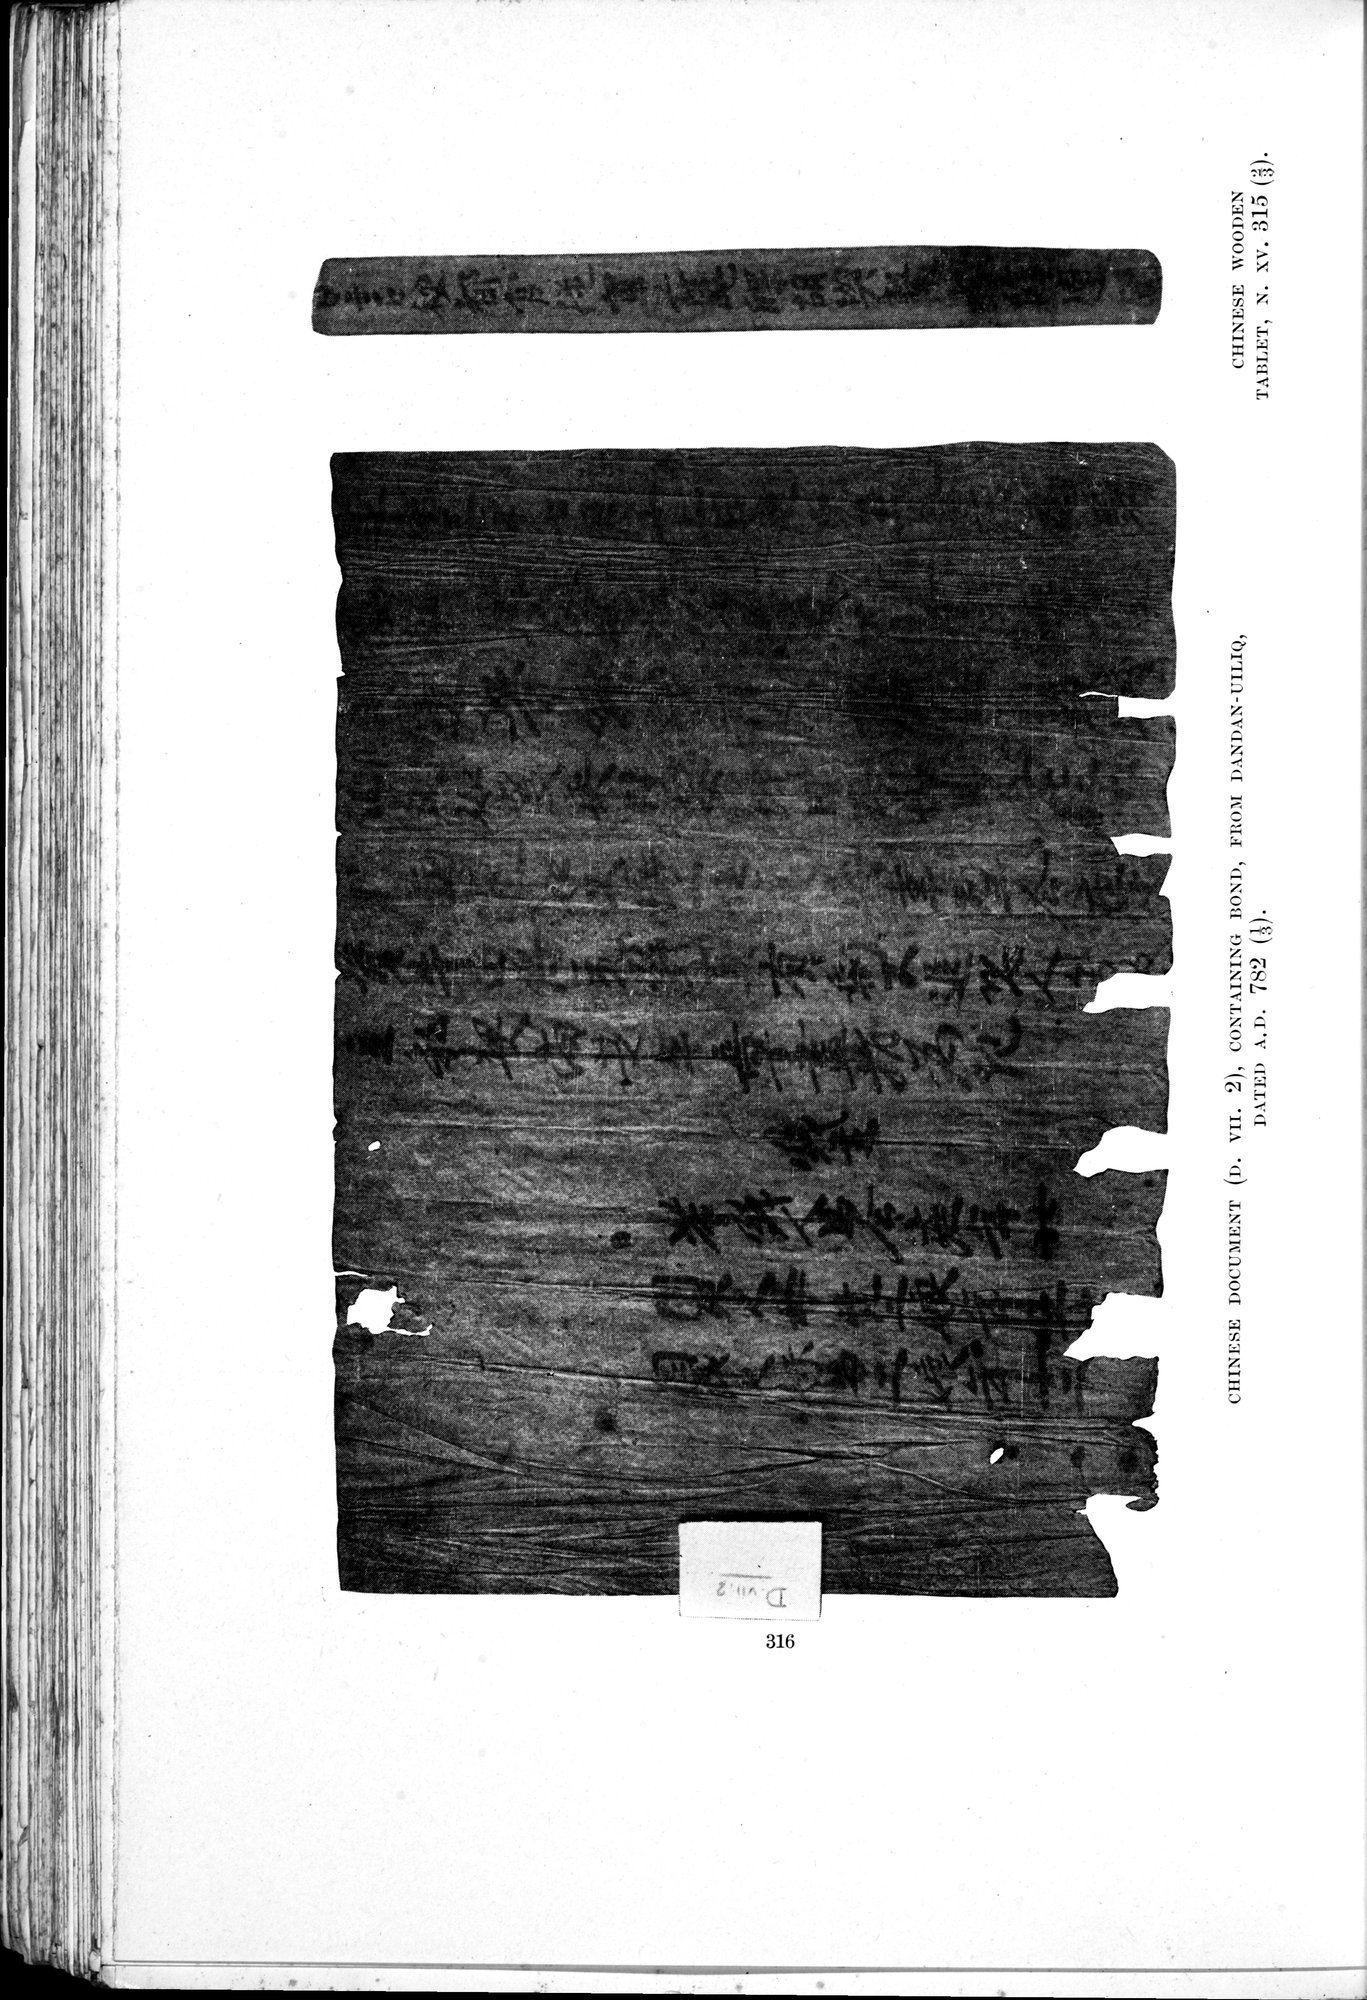 Sand-Buried Ruins of Khotan : vol.1 / Page 368 (Grayscale High Resolution Image)